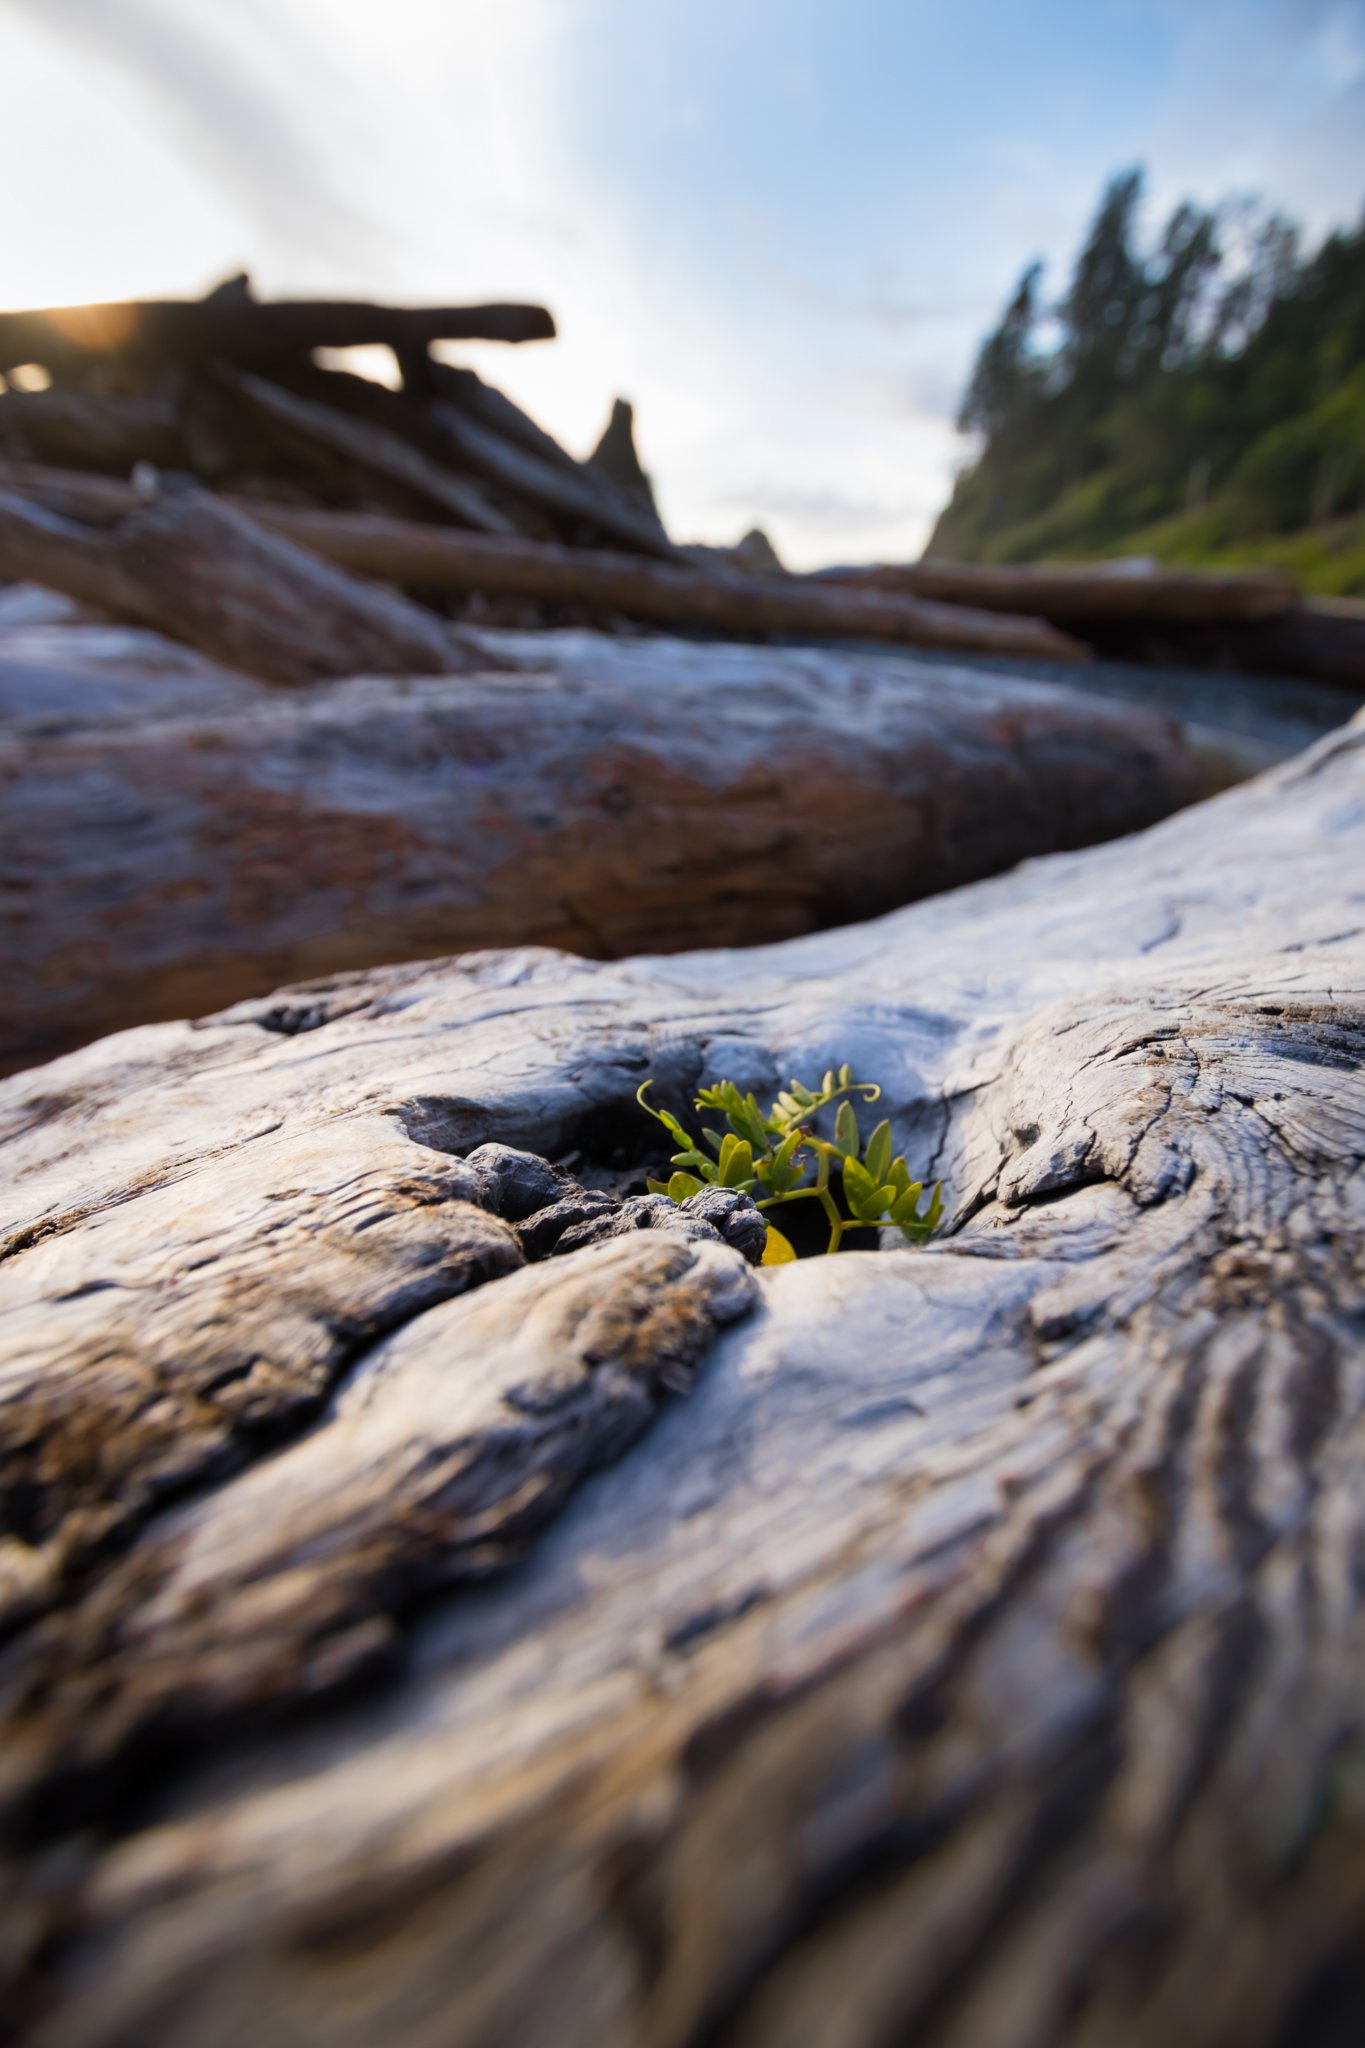 At Ruby beach, it's easy to get busy photographing an incredible landscape. I let myself relax for awhile on one of the massive logs and discovered a wealth of details that I might not have otherwise noticed.